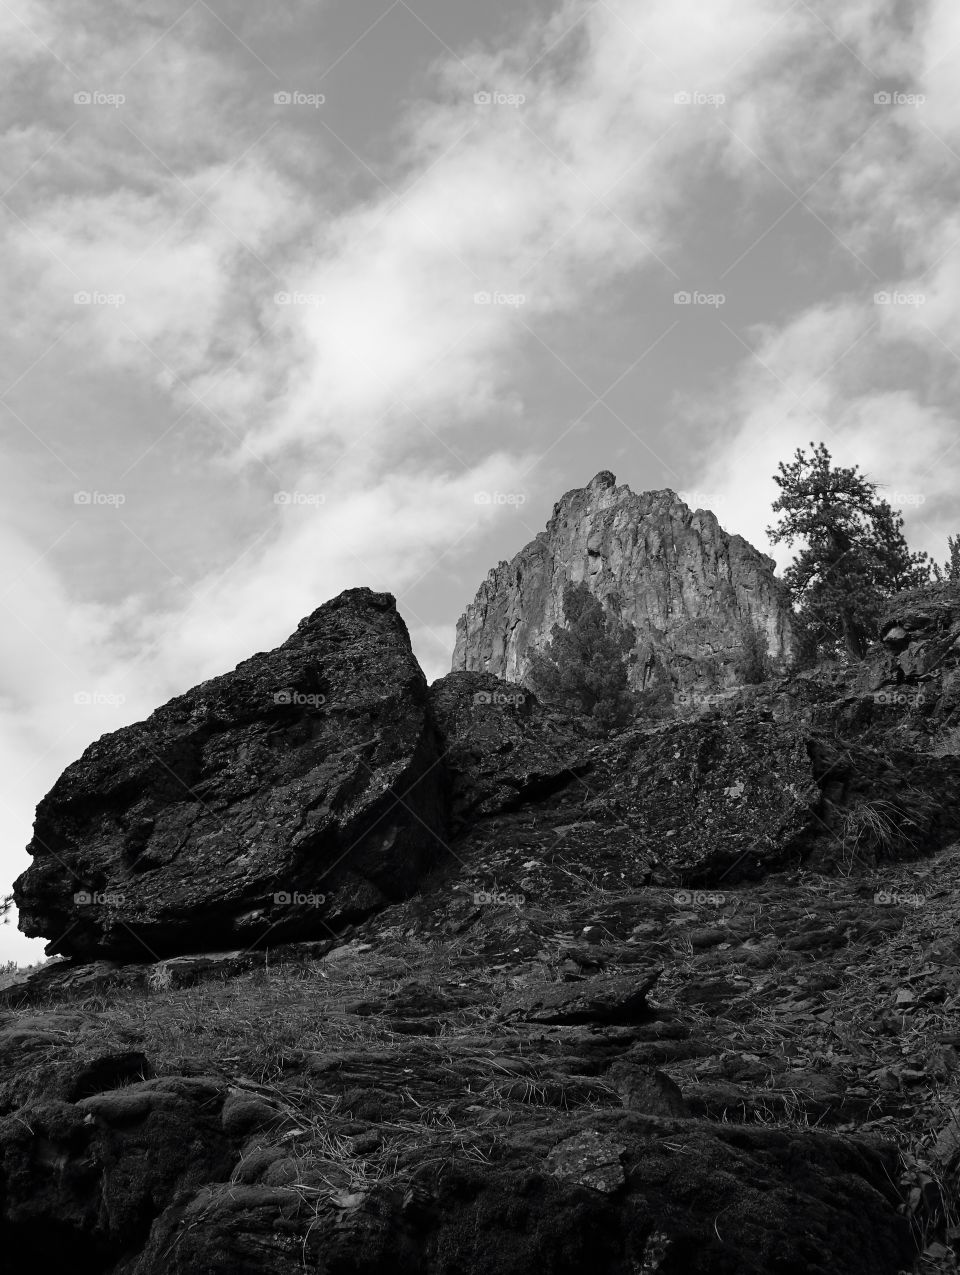 Black & White geology in Central Oregon 